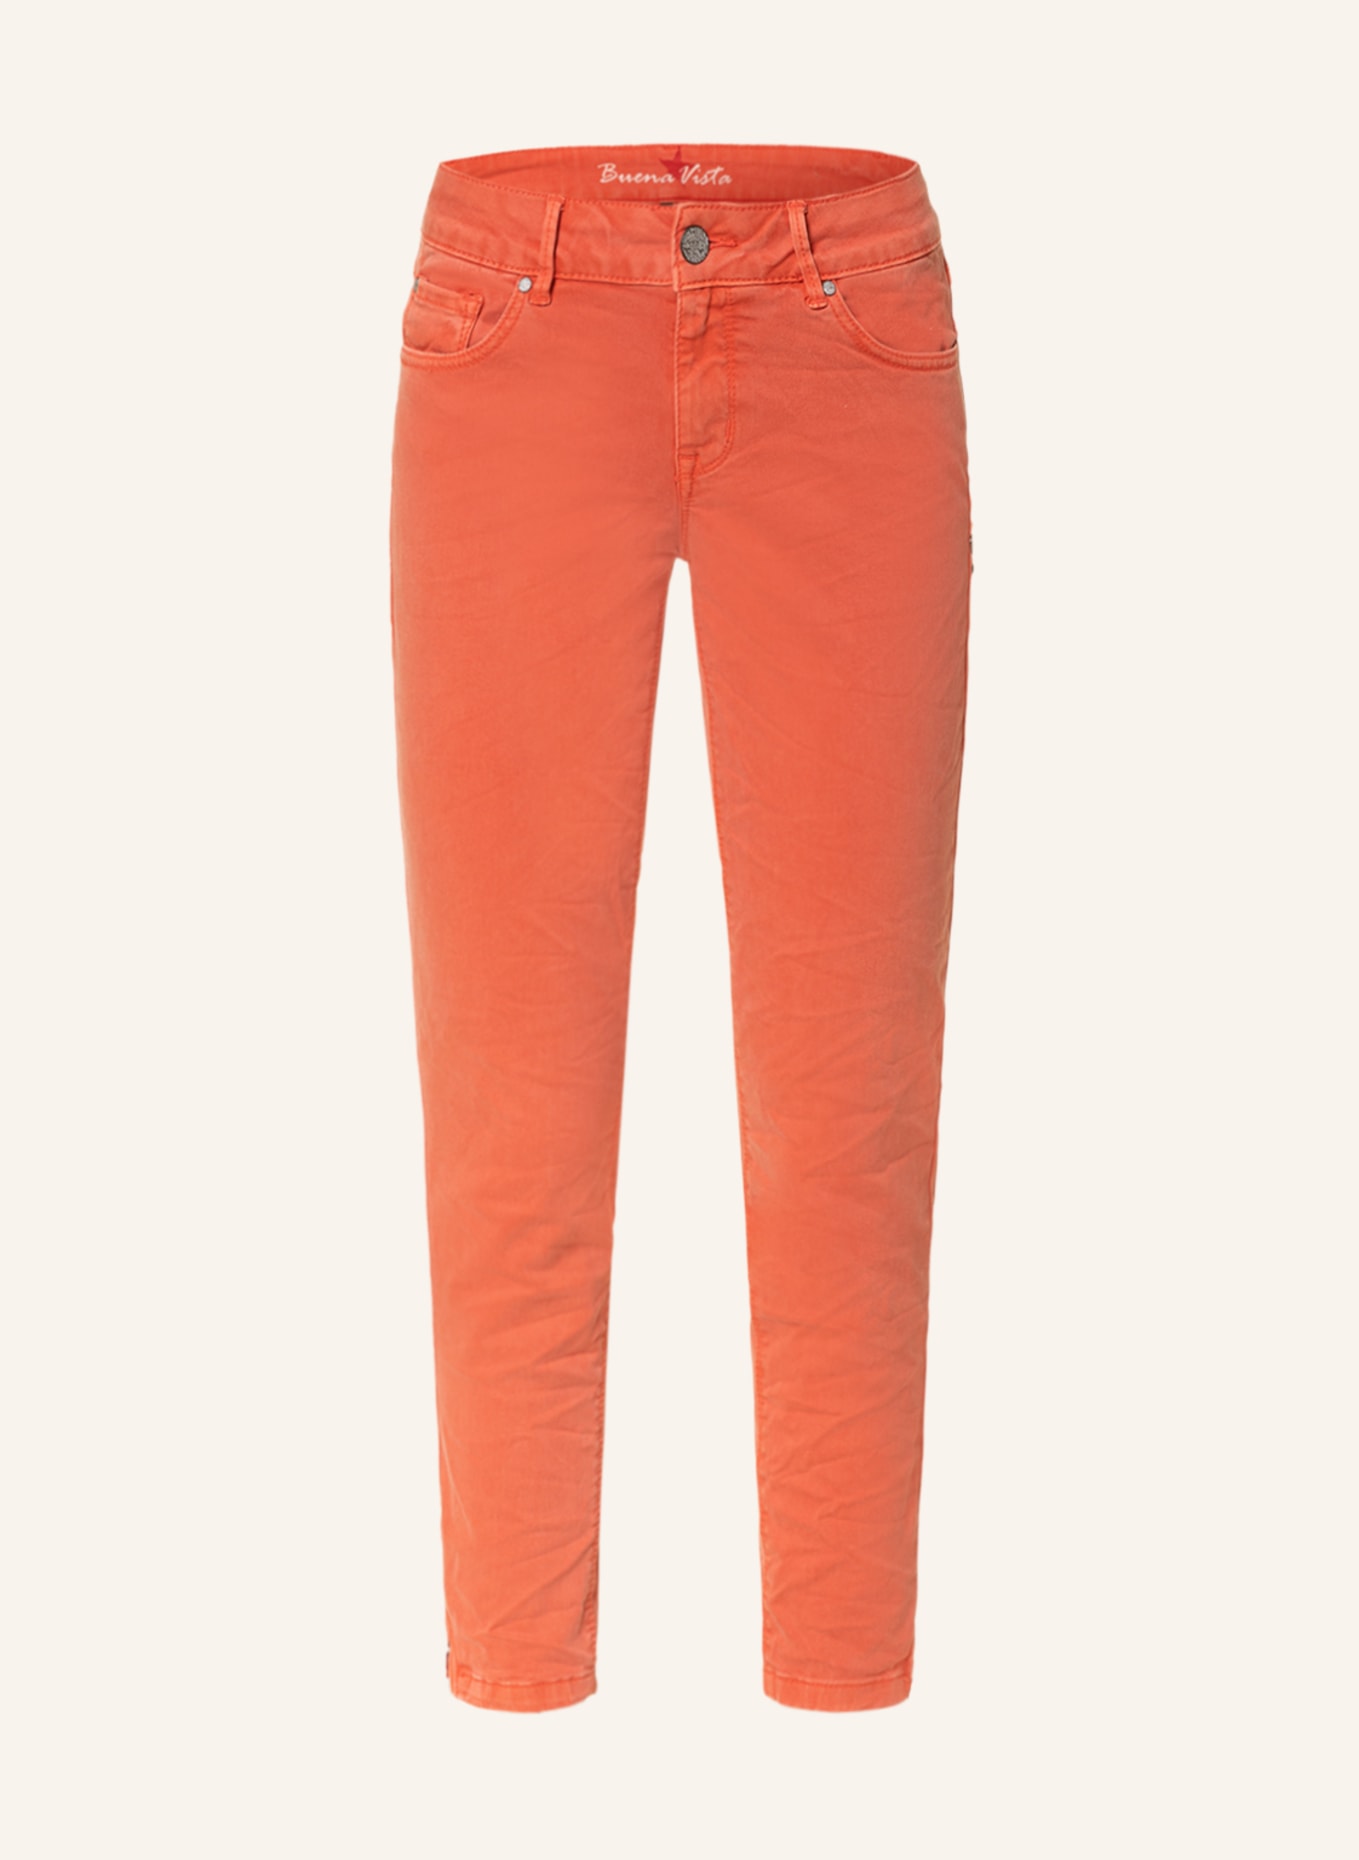 Buena Vista 7/8 jeans ITALY, Color: LIGHT RED (Image 1)